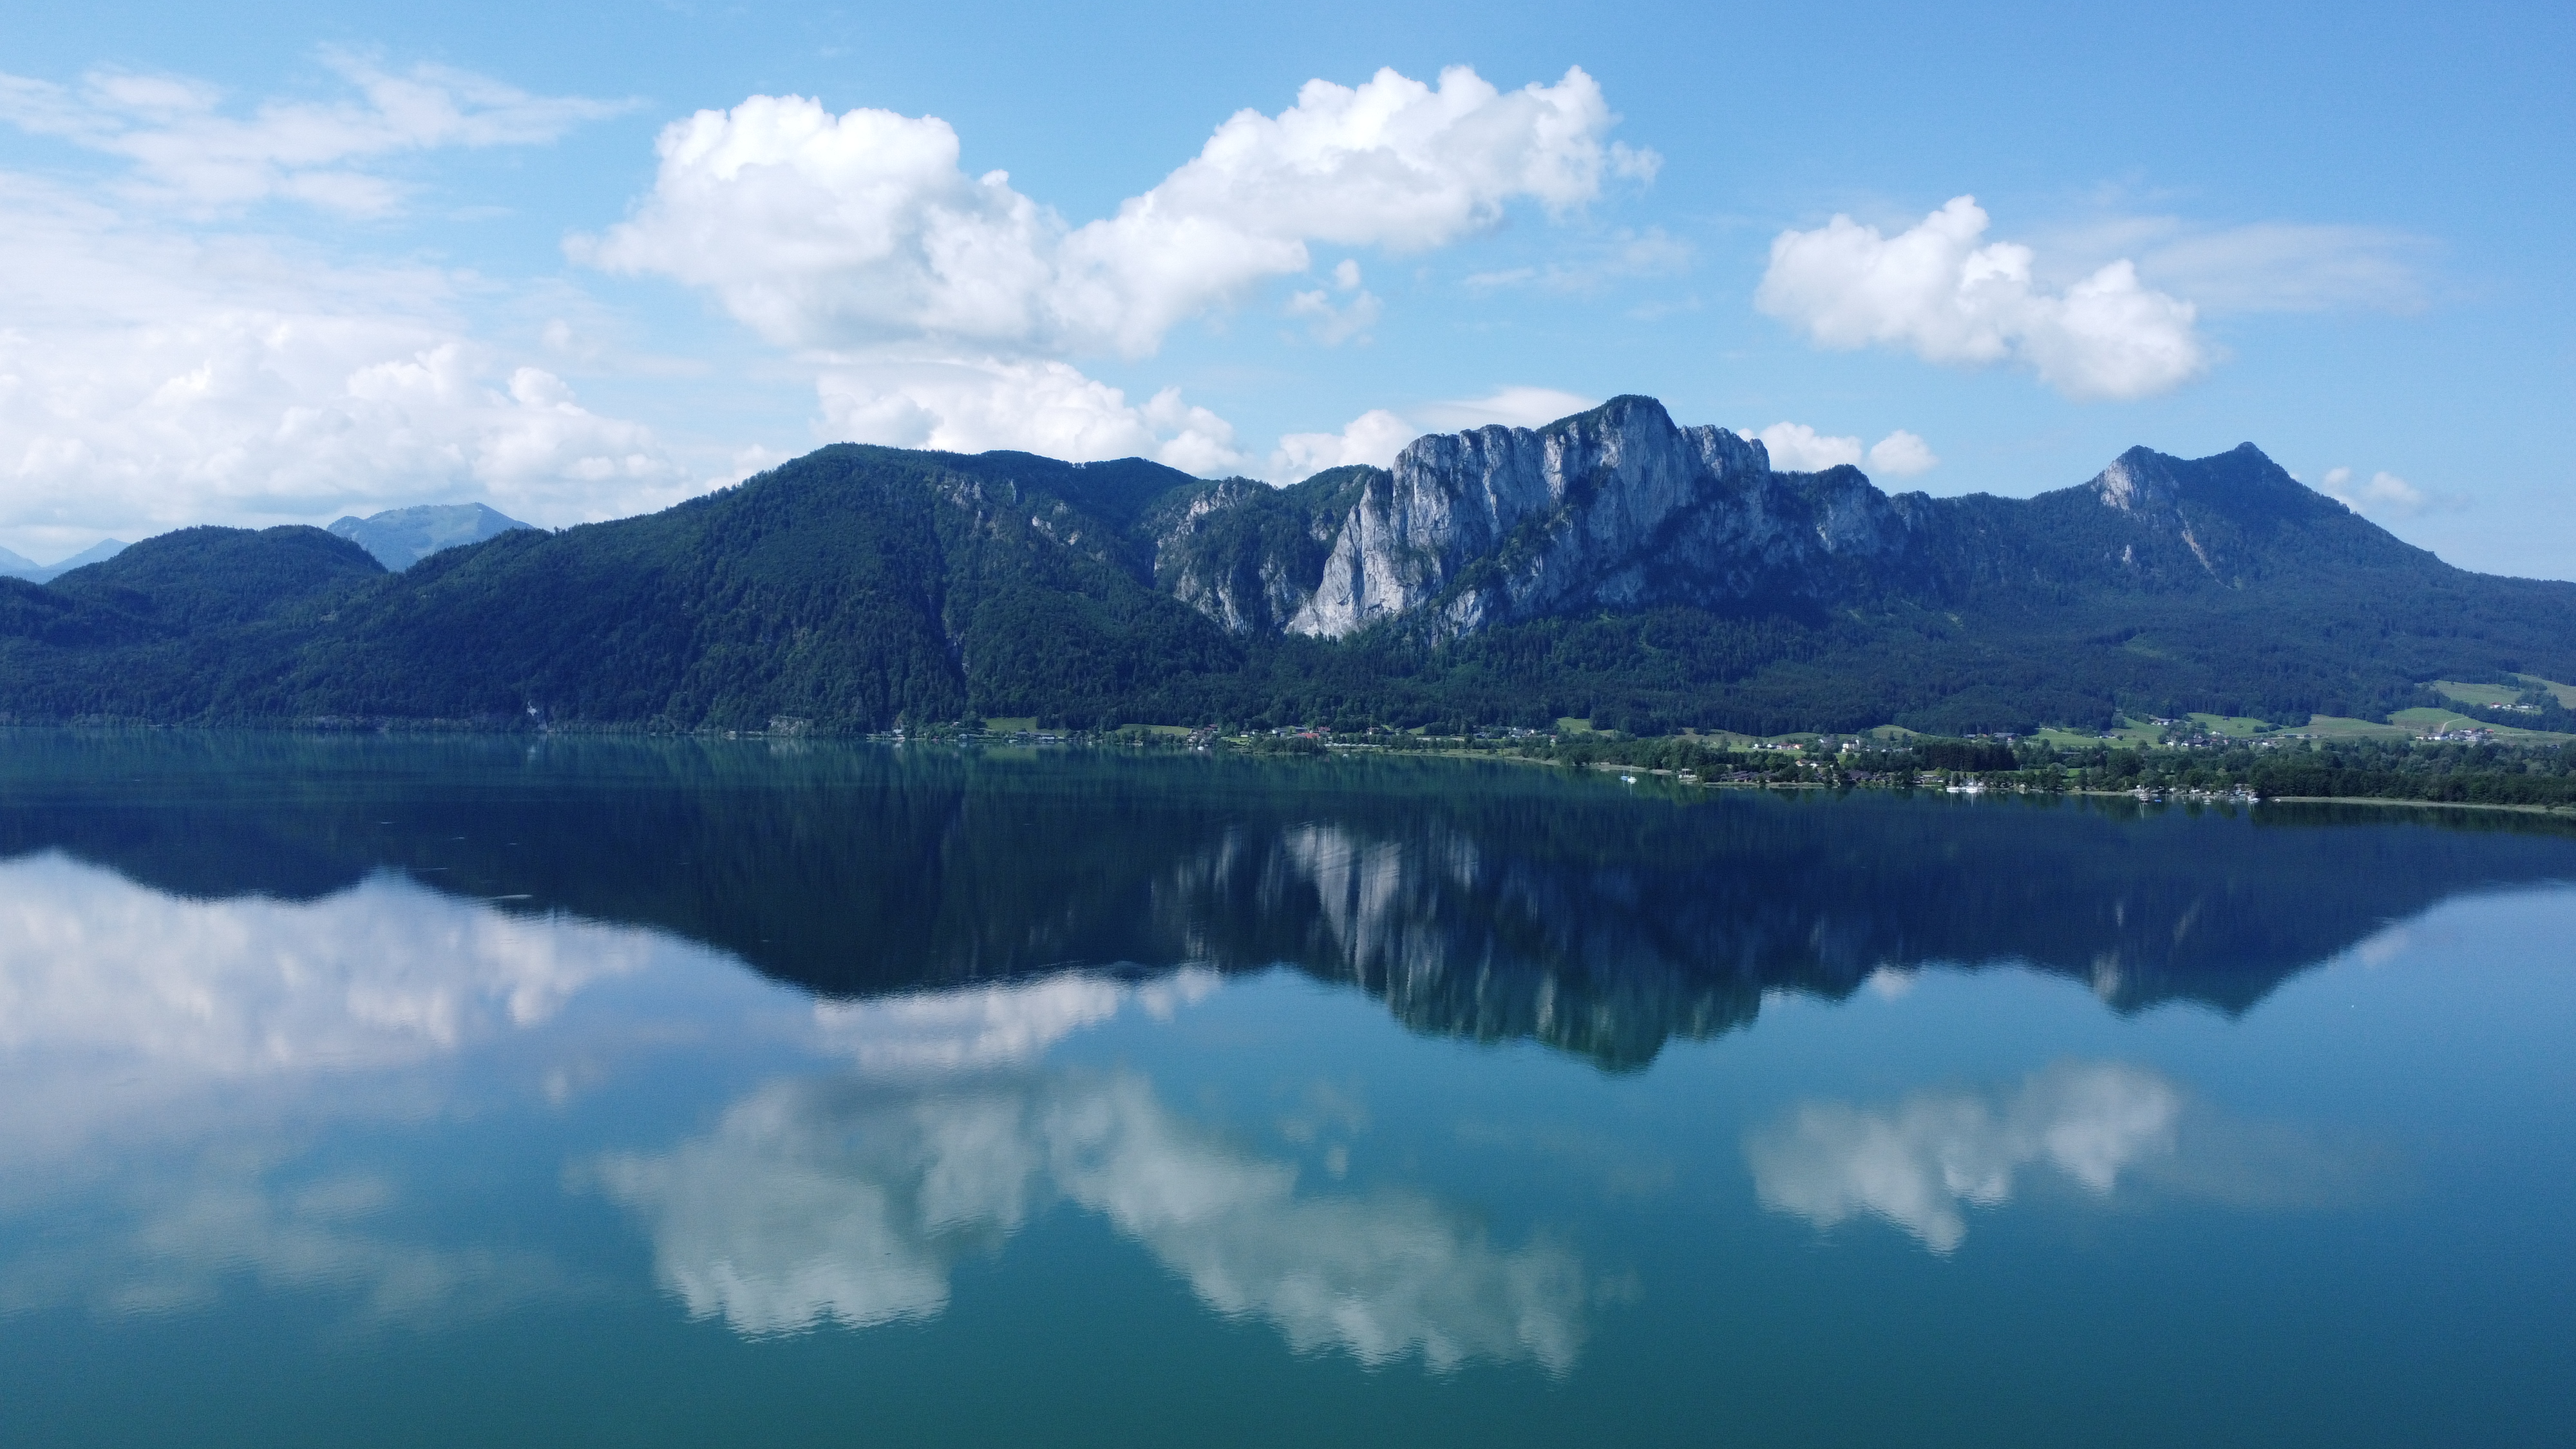 Moondsee Austria Lake Water Reflection Mountains Clouds Sky Landscape Nature 4000x2250